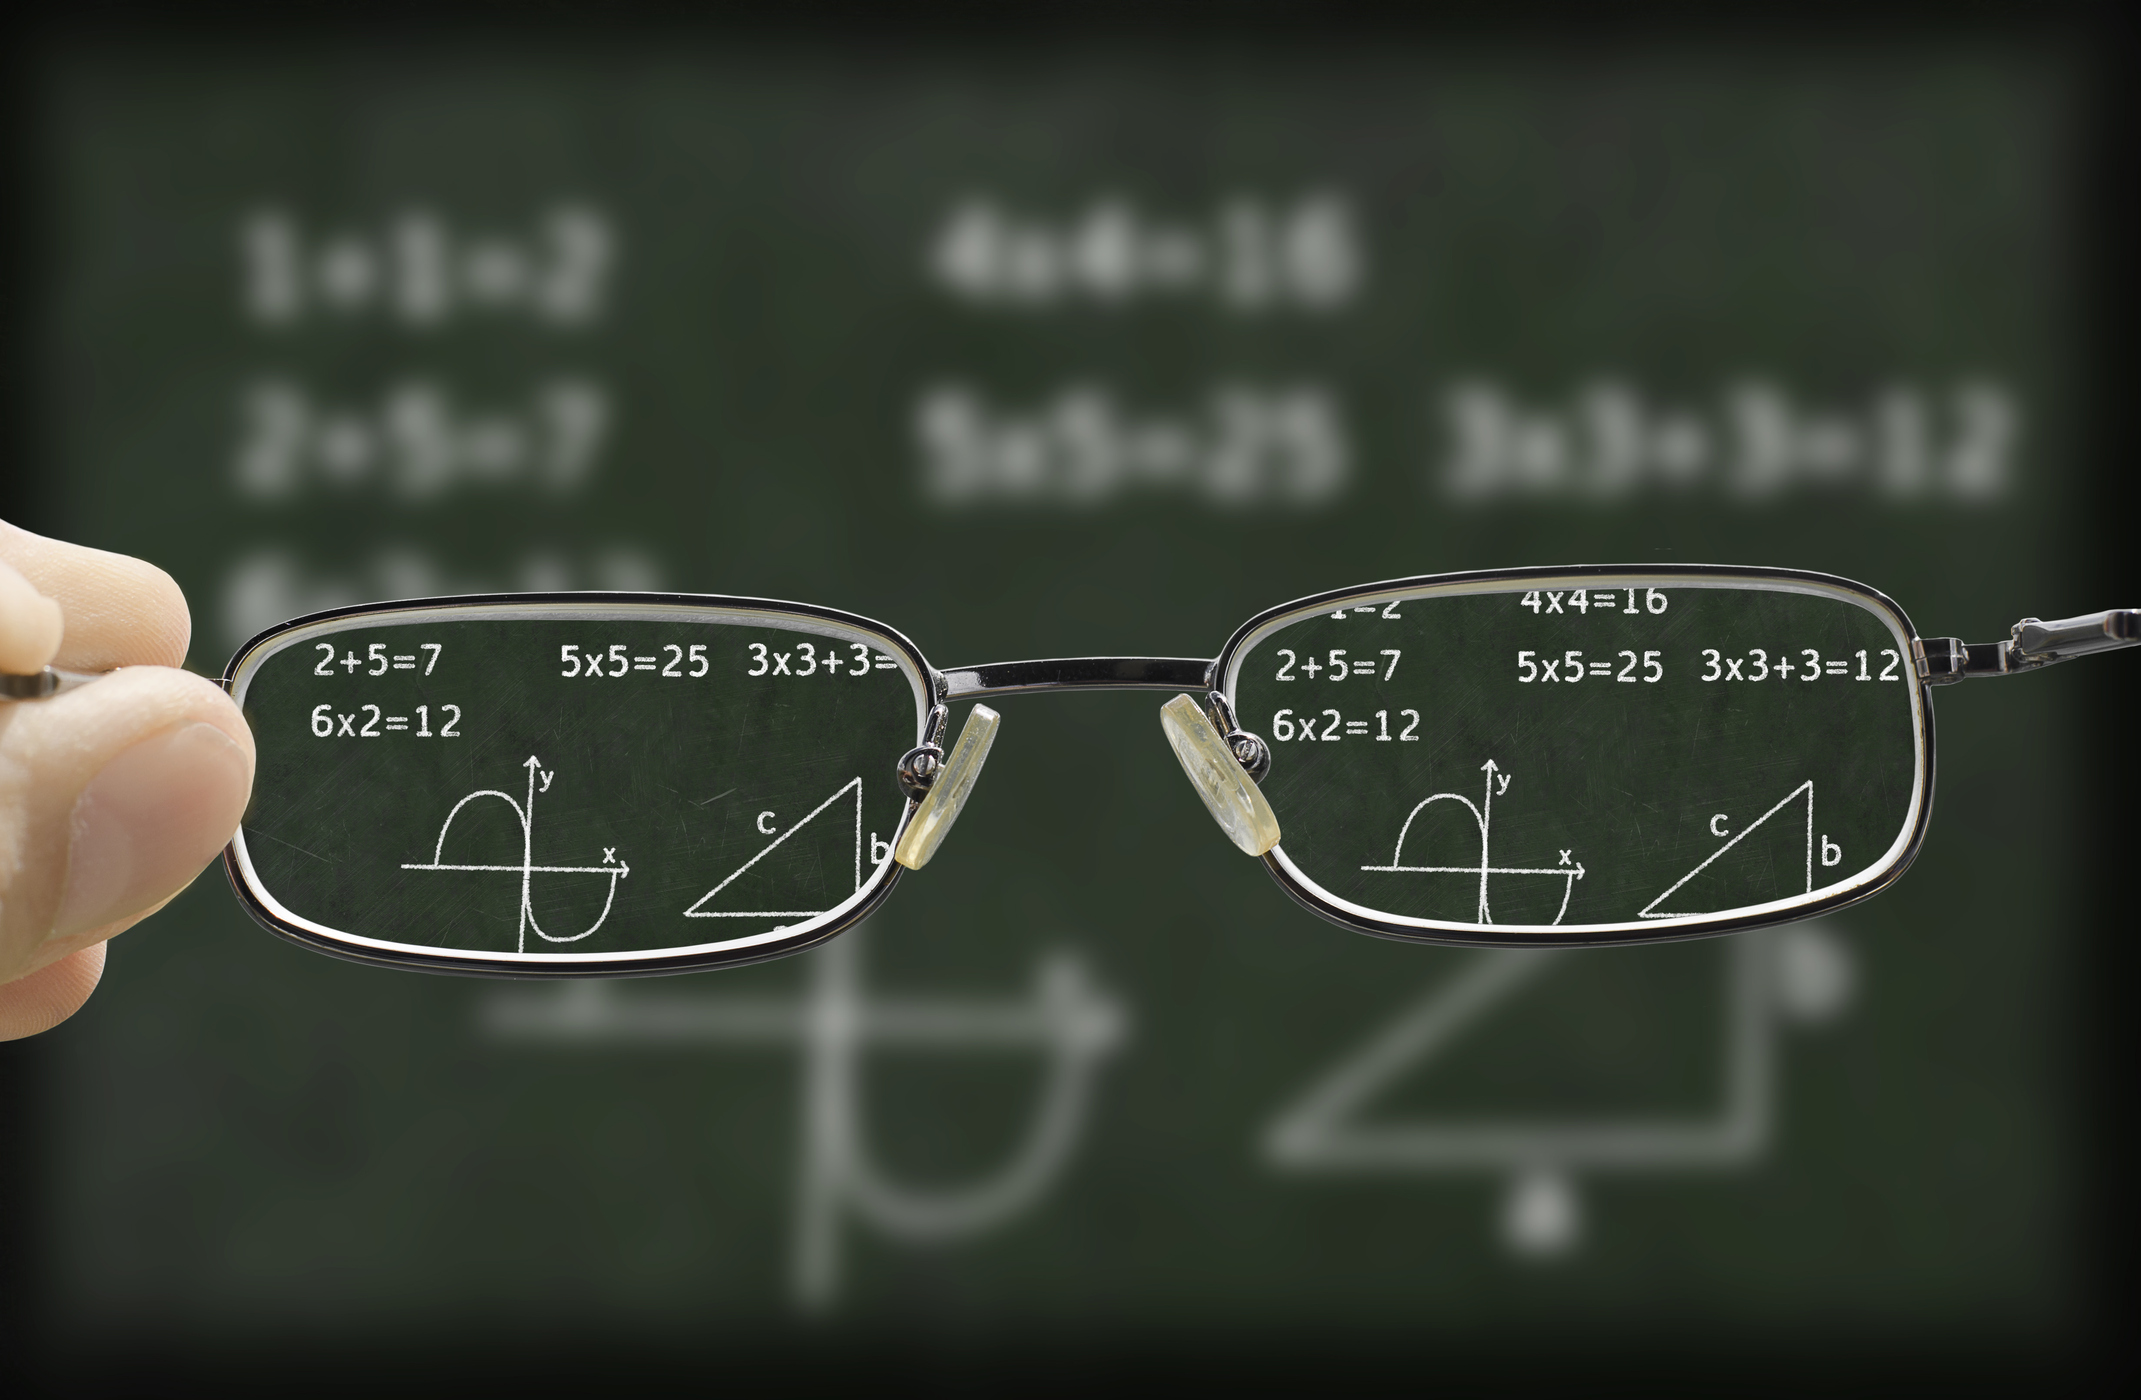 blurry vision of a chalkboard corrected by the glasses